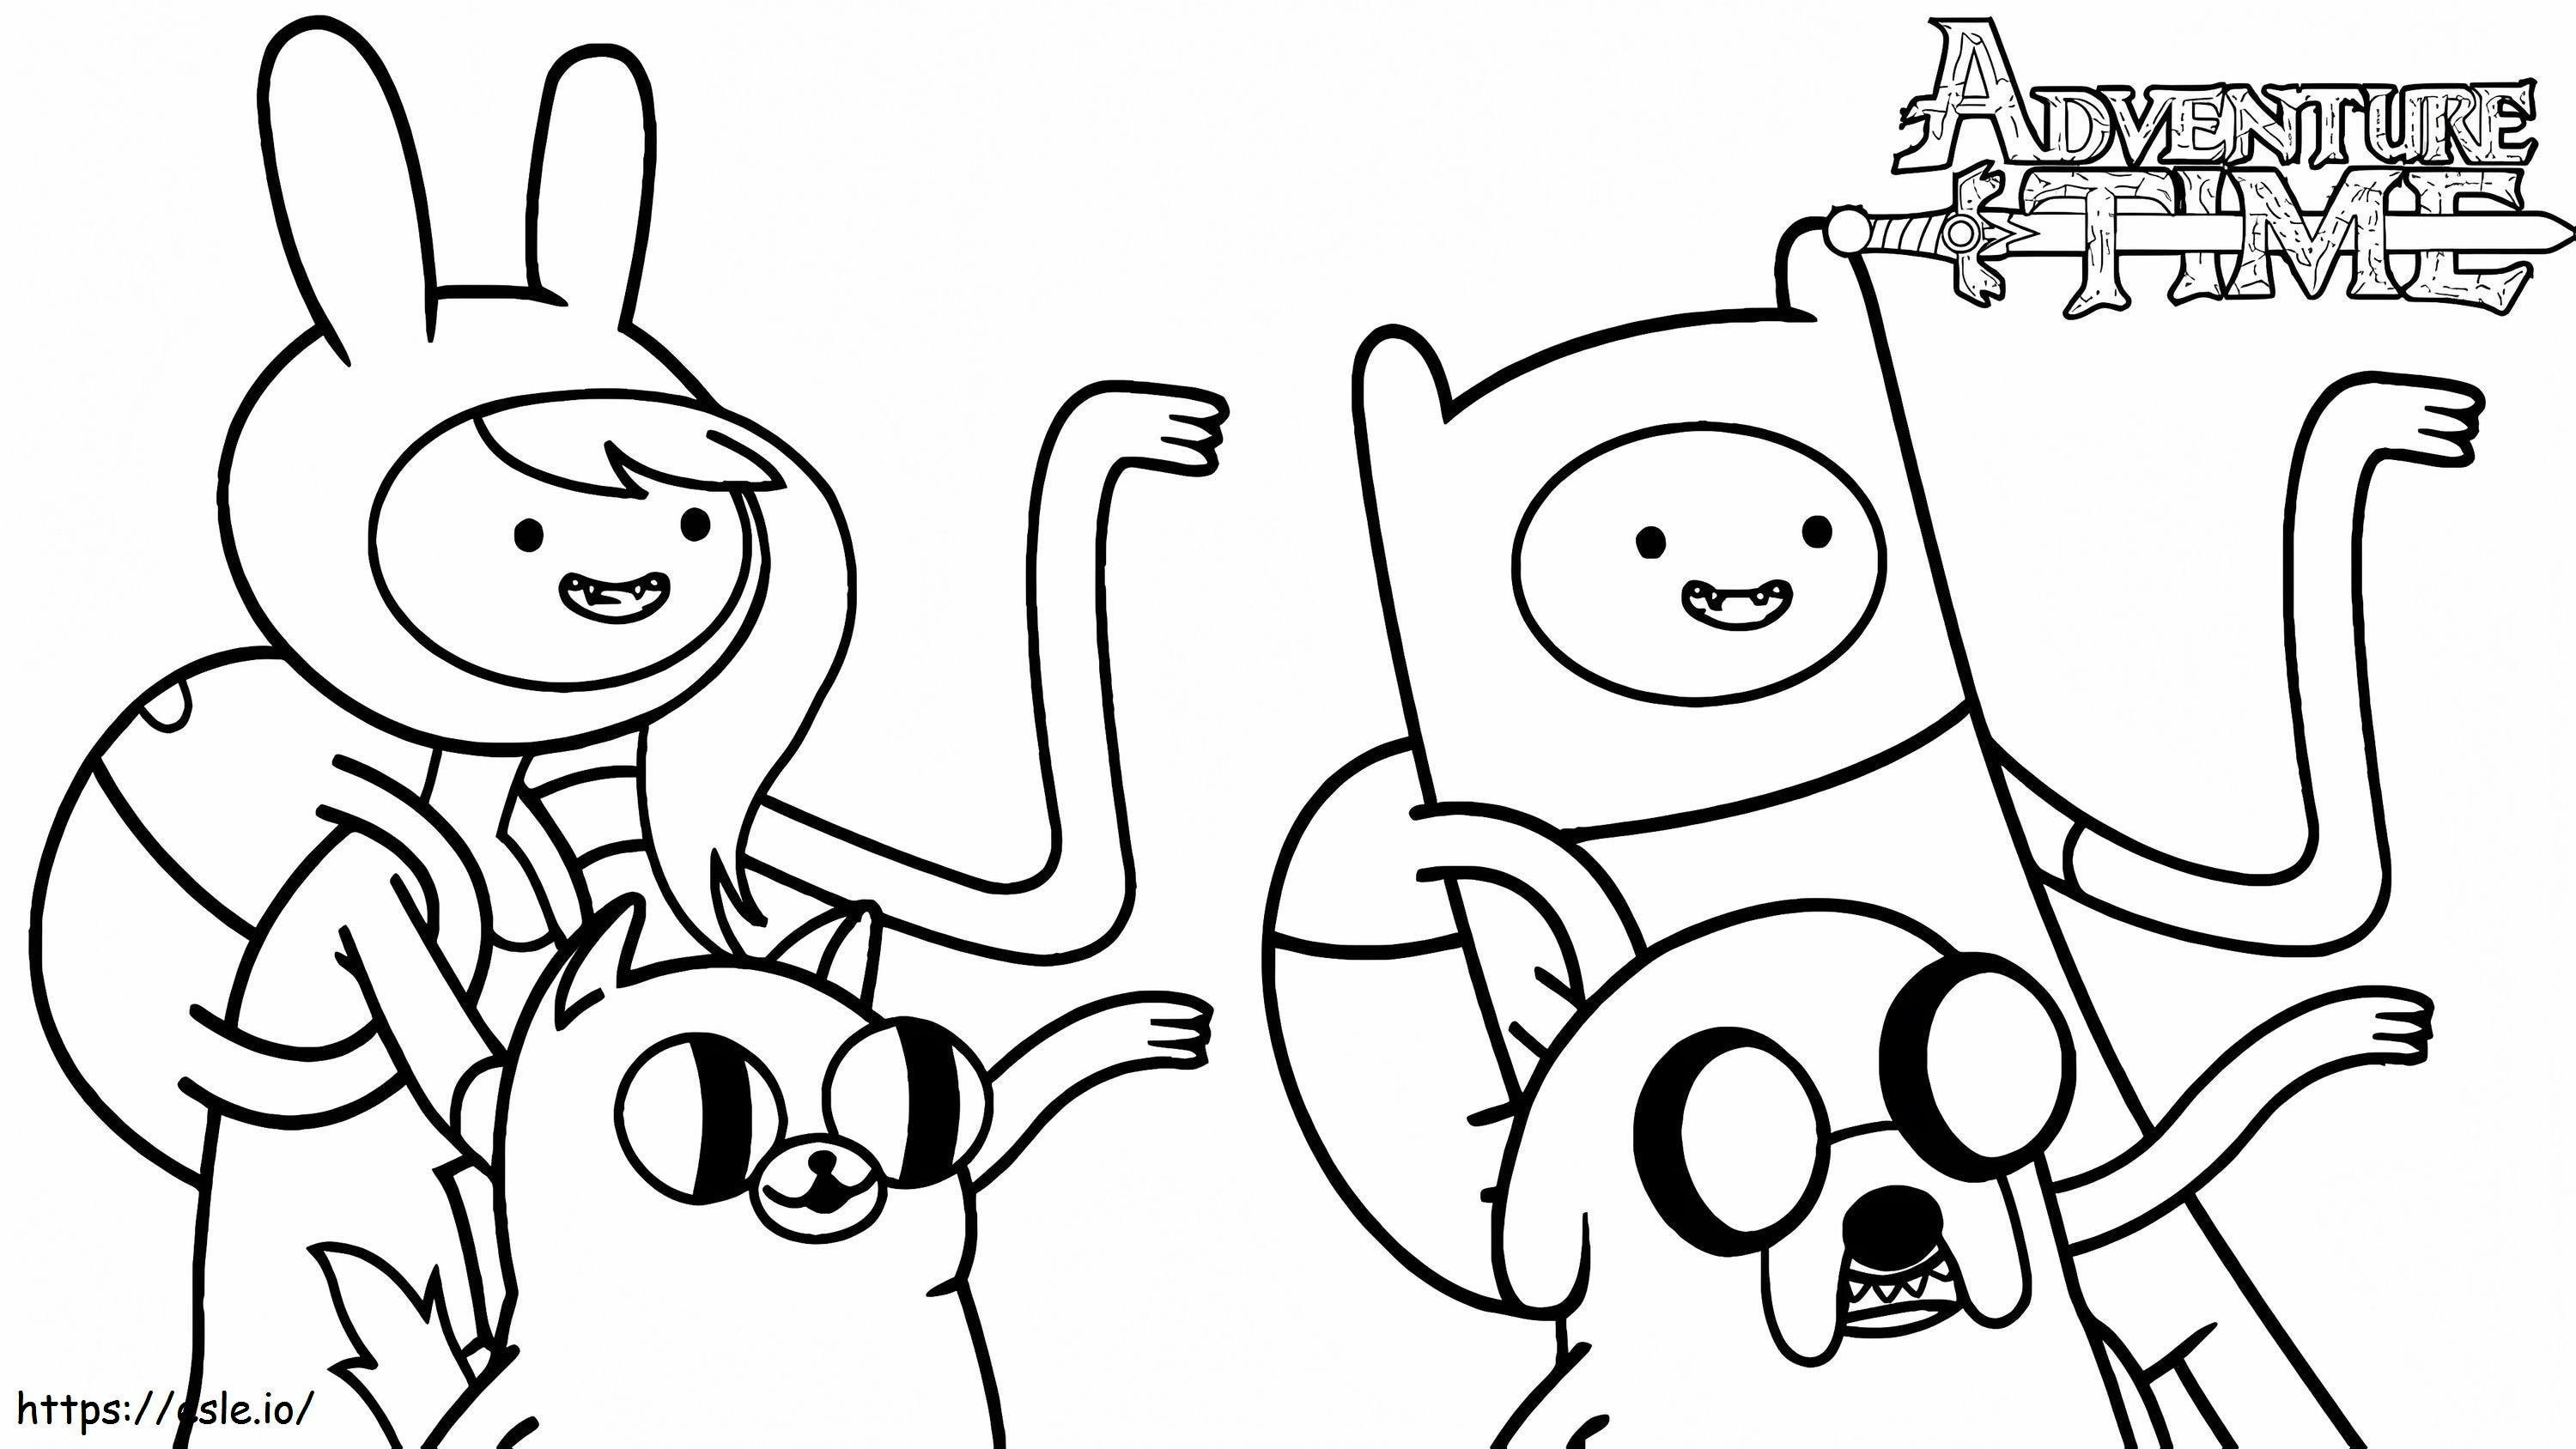 Face Finn And His Friends coloring page